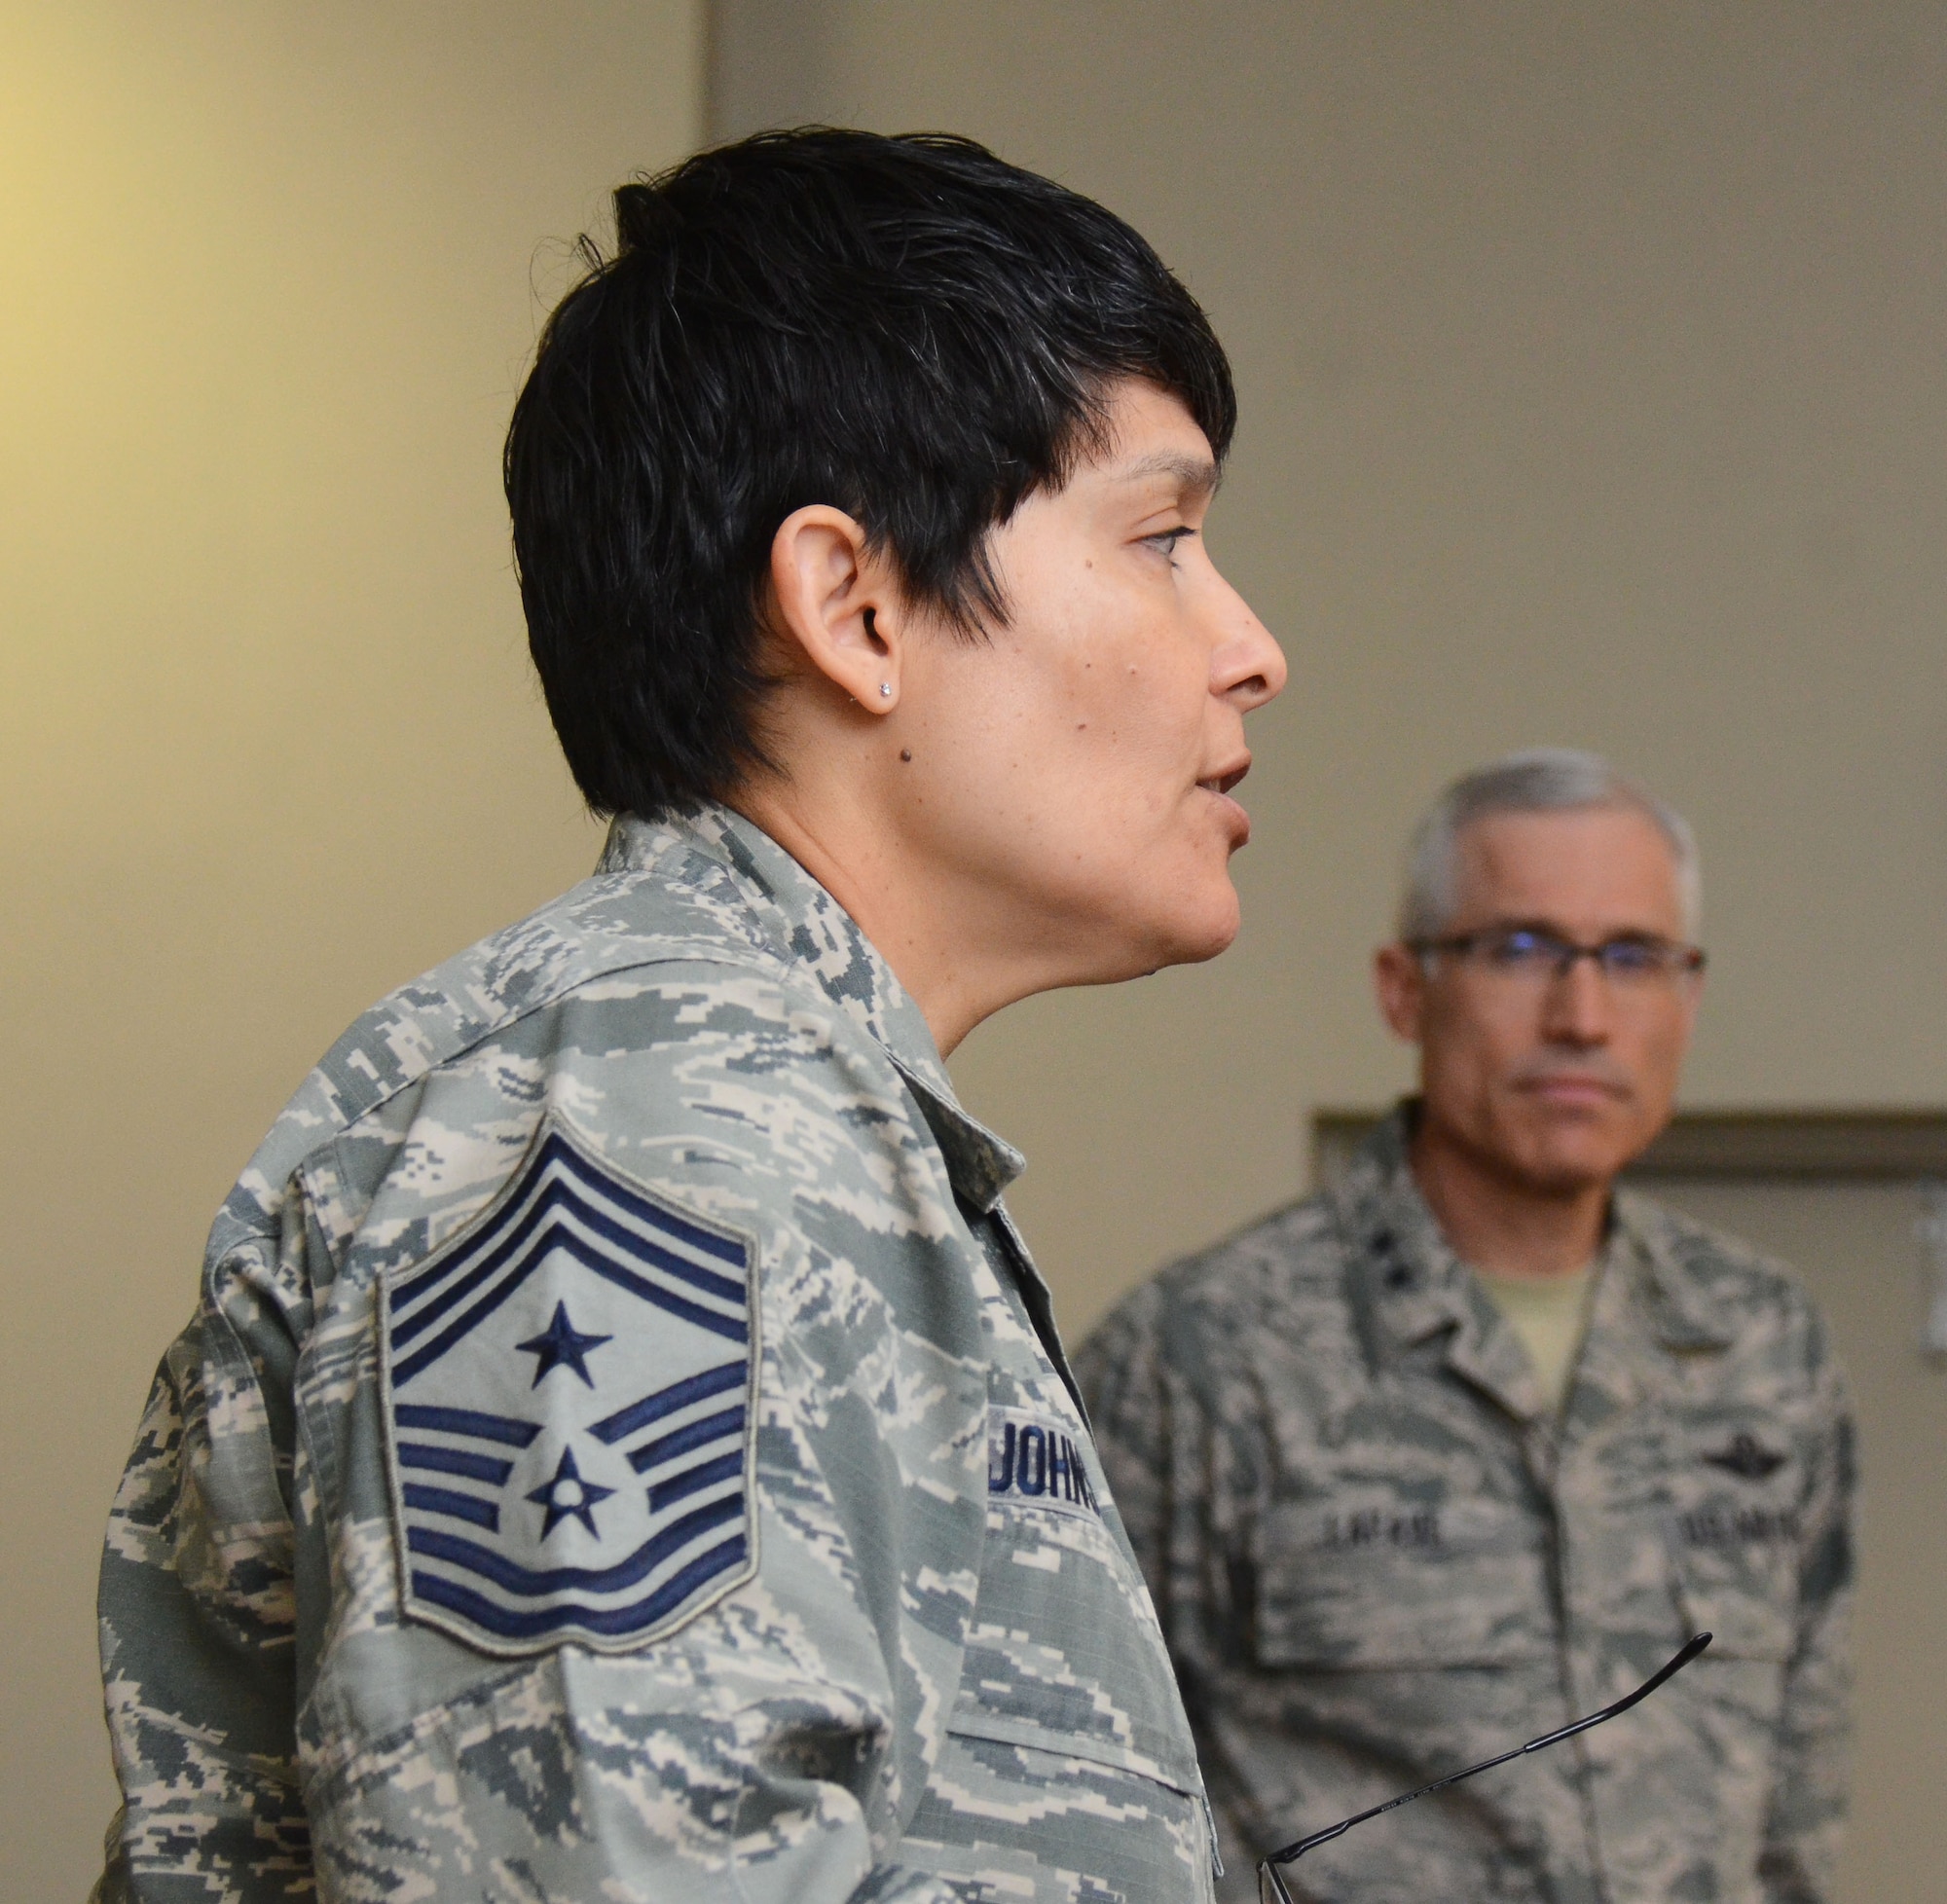 Twenty-Second Air Force Command Chief Imelda Johnson addresses the 22nd Air Force Senior Leader Summit attendees as 22nd Air Force Commander Maj. Gen. Craig La Fave looks on March 15, 2018 at Dobbins Air Reserve Base, Georgia.